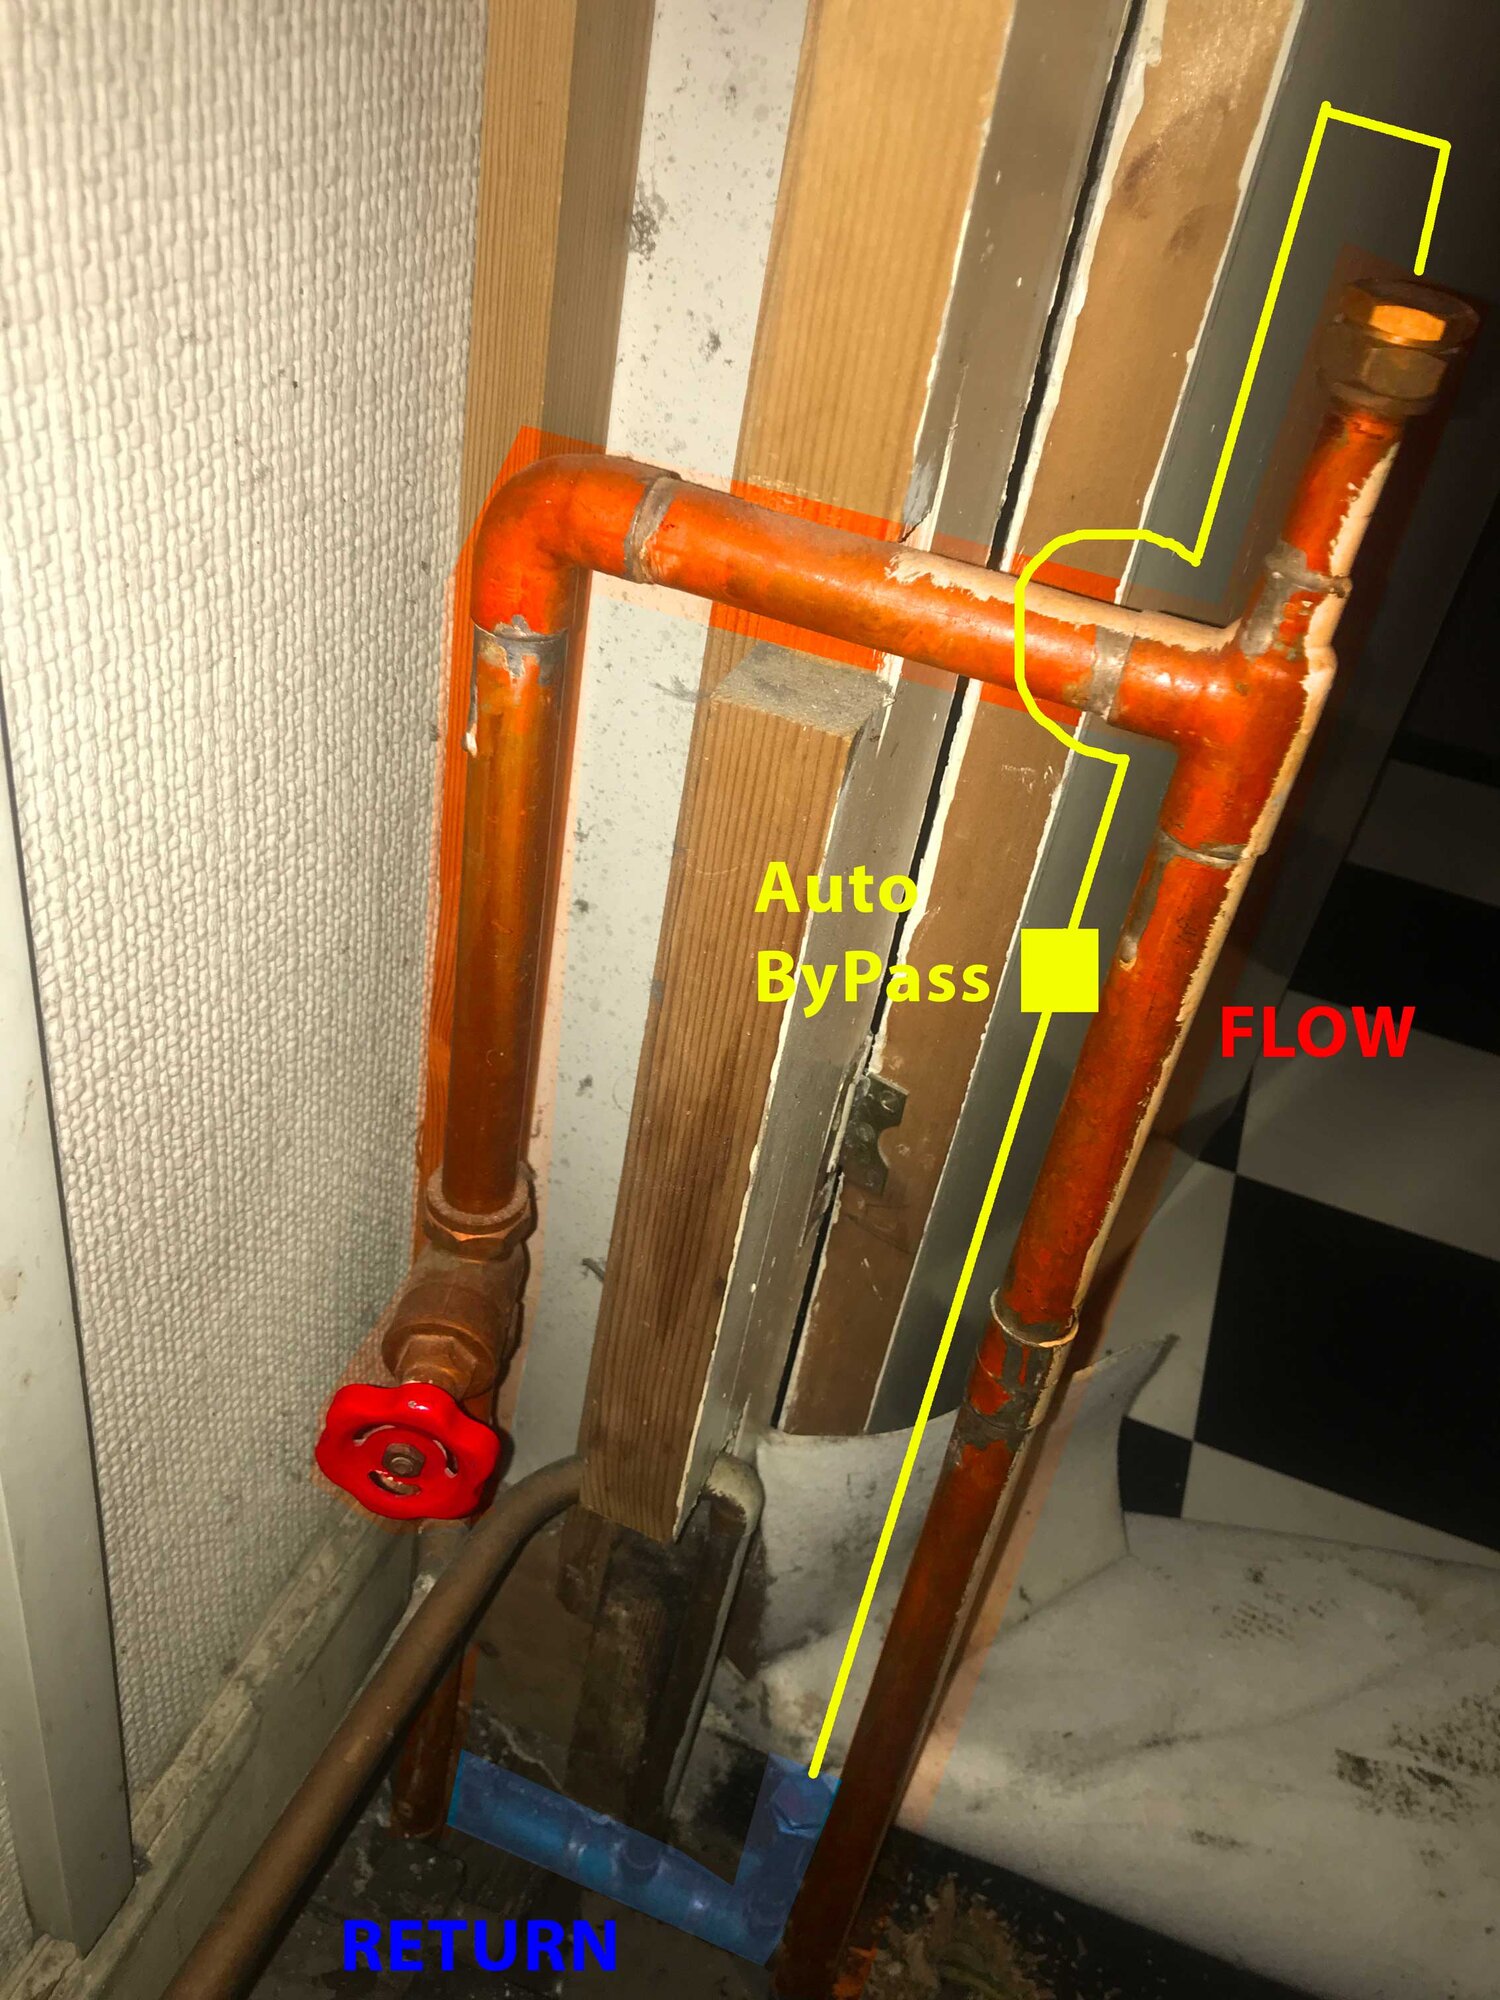 do I need install an additional Auto bypass valve if the combi already